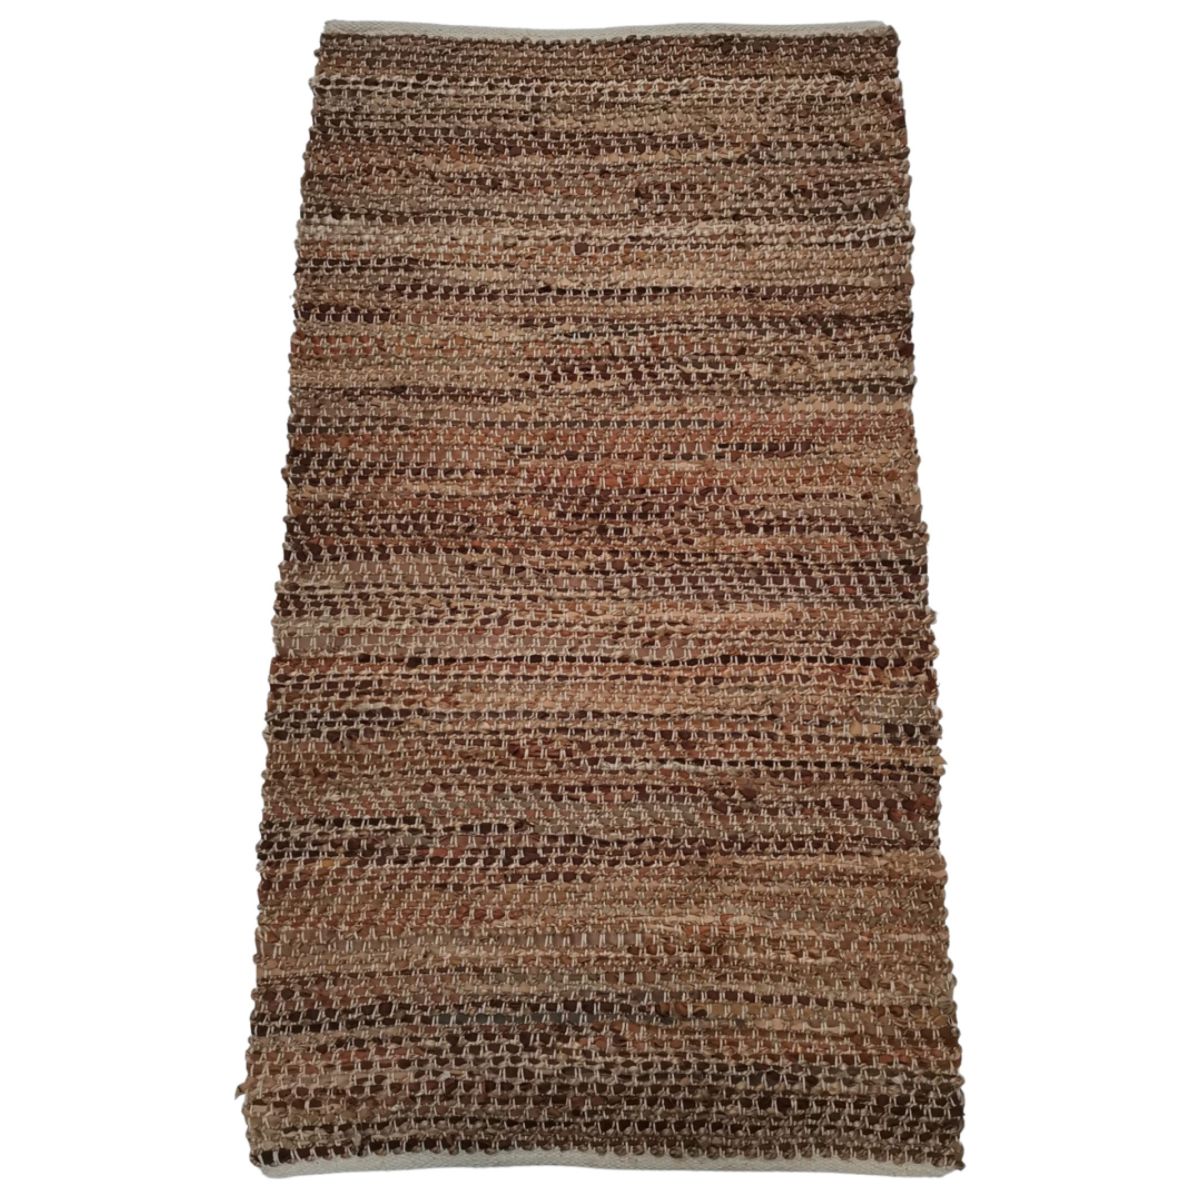 rug 80x240cm woven recycled leather earth tones and jute